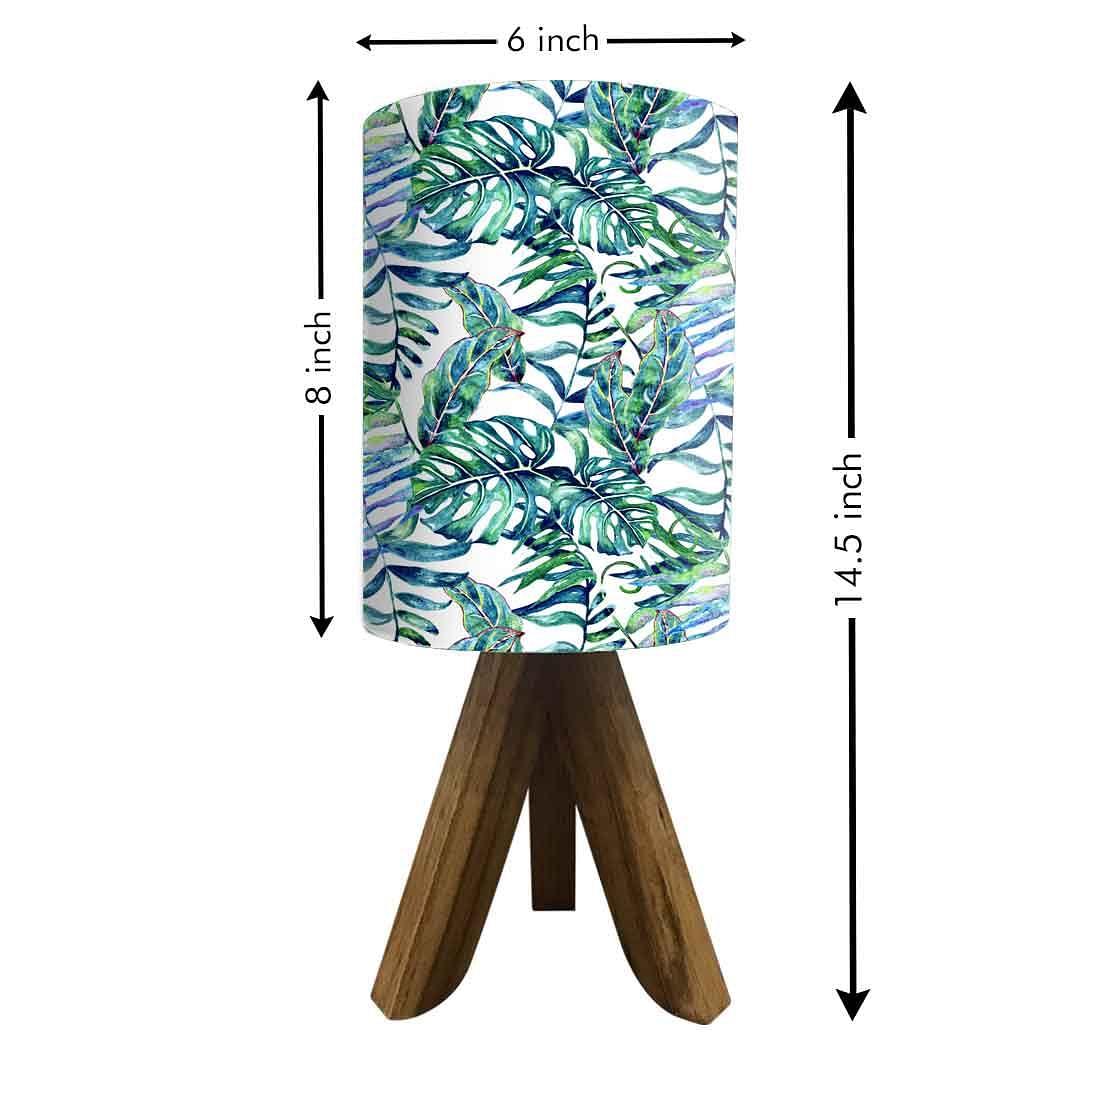 Wooden Study Table Lamp For Bedroom - Leaves Nutcase